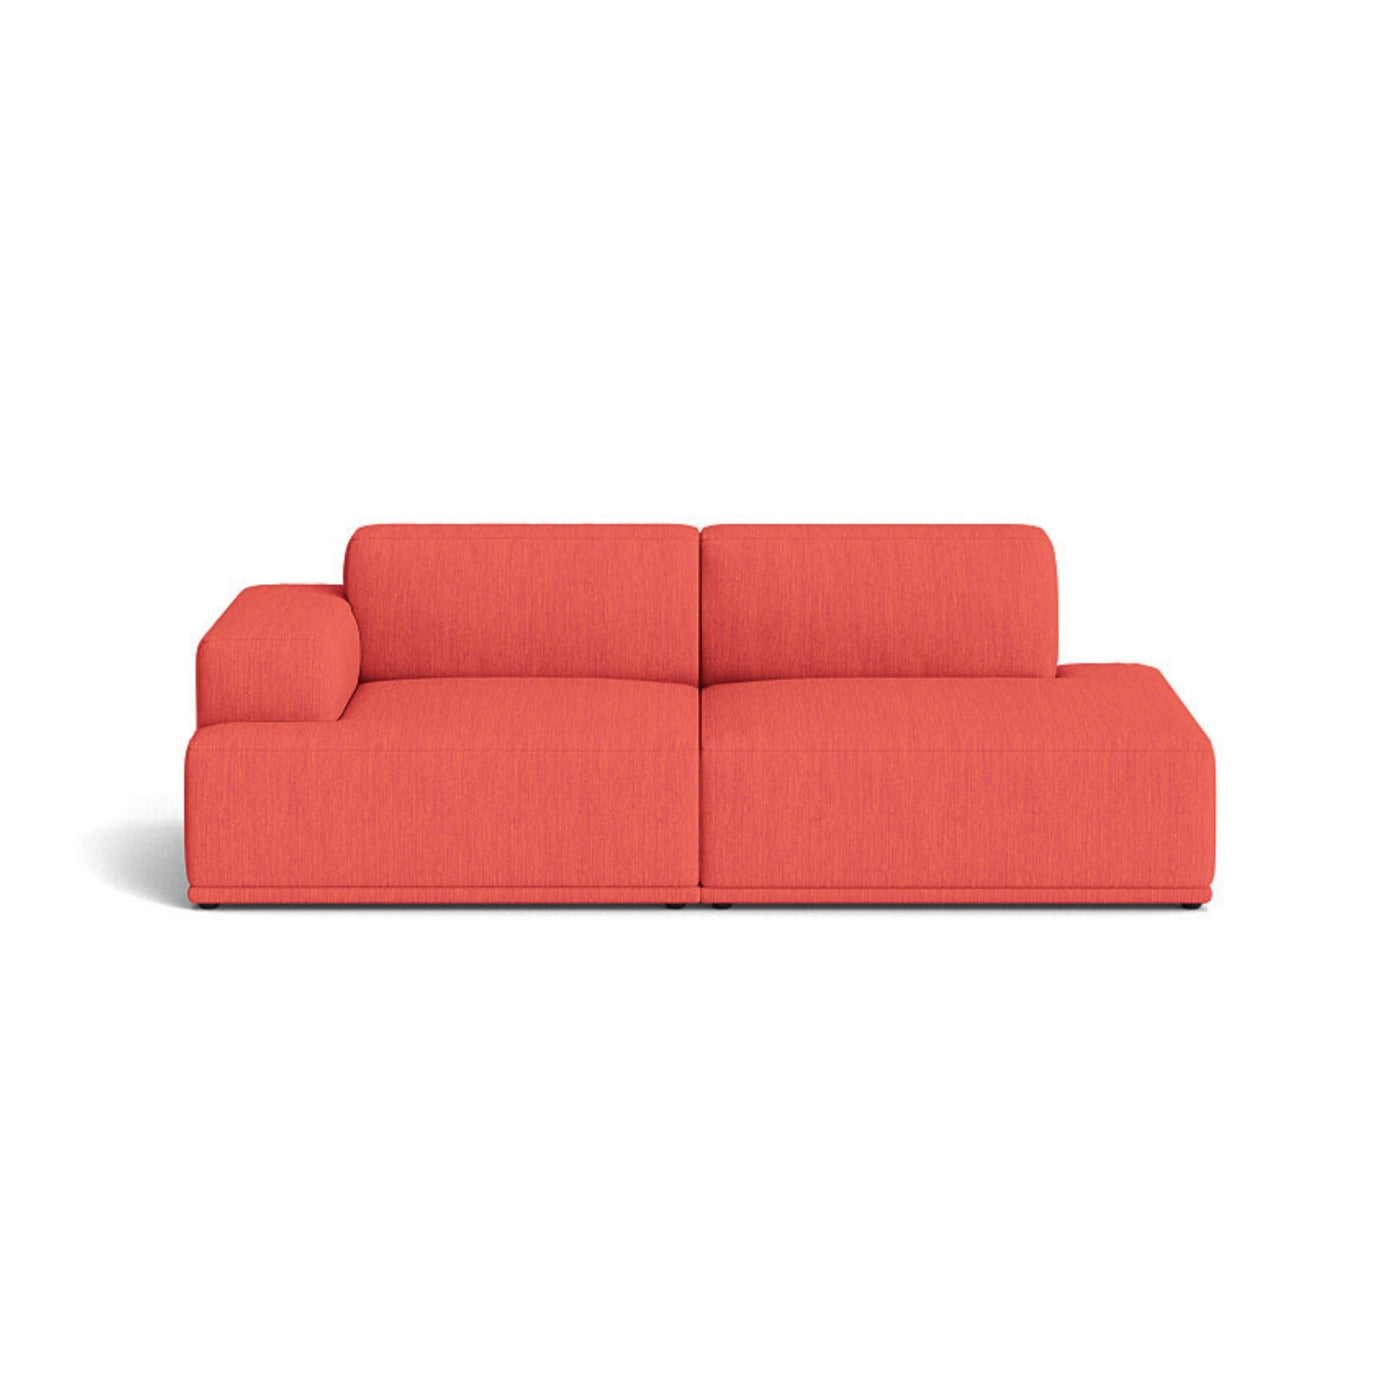 Muuto Connect Soft Modular 2 Seater Sofa, configuration 2. made-to-order from someday designs. #colour_balder-562